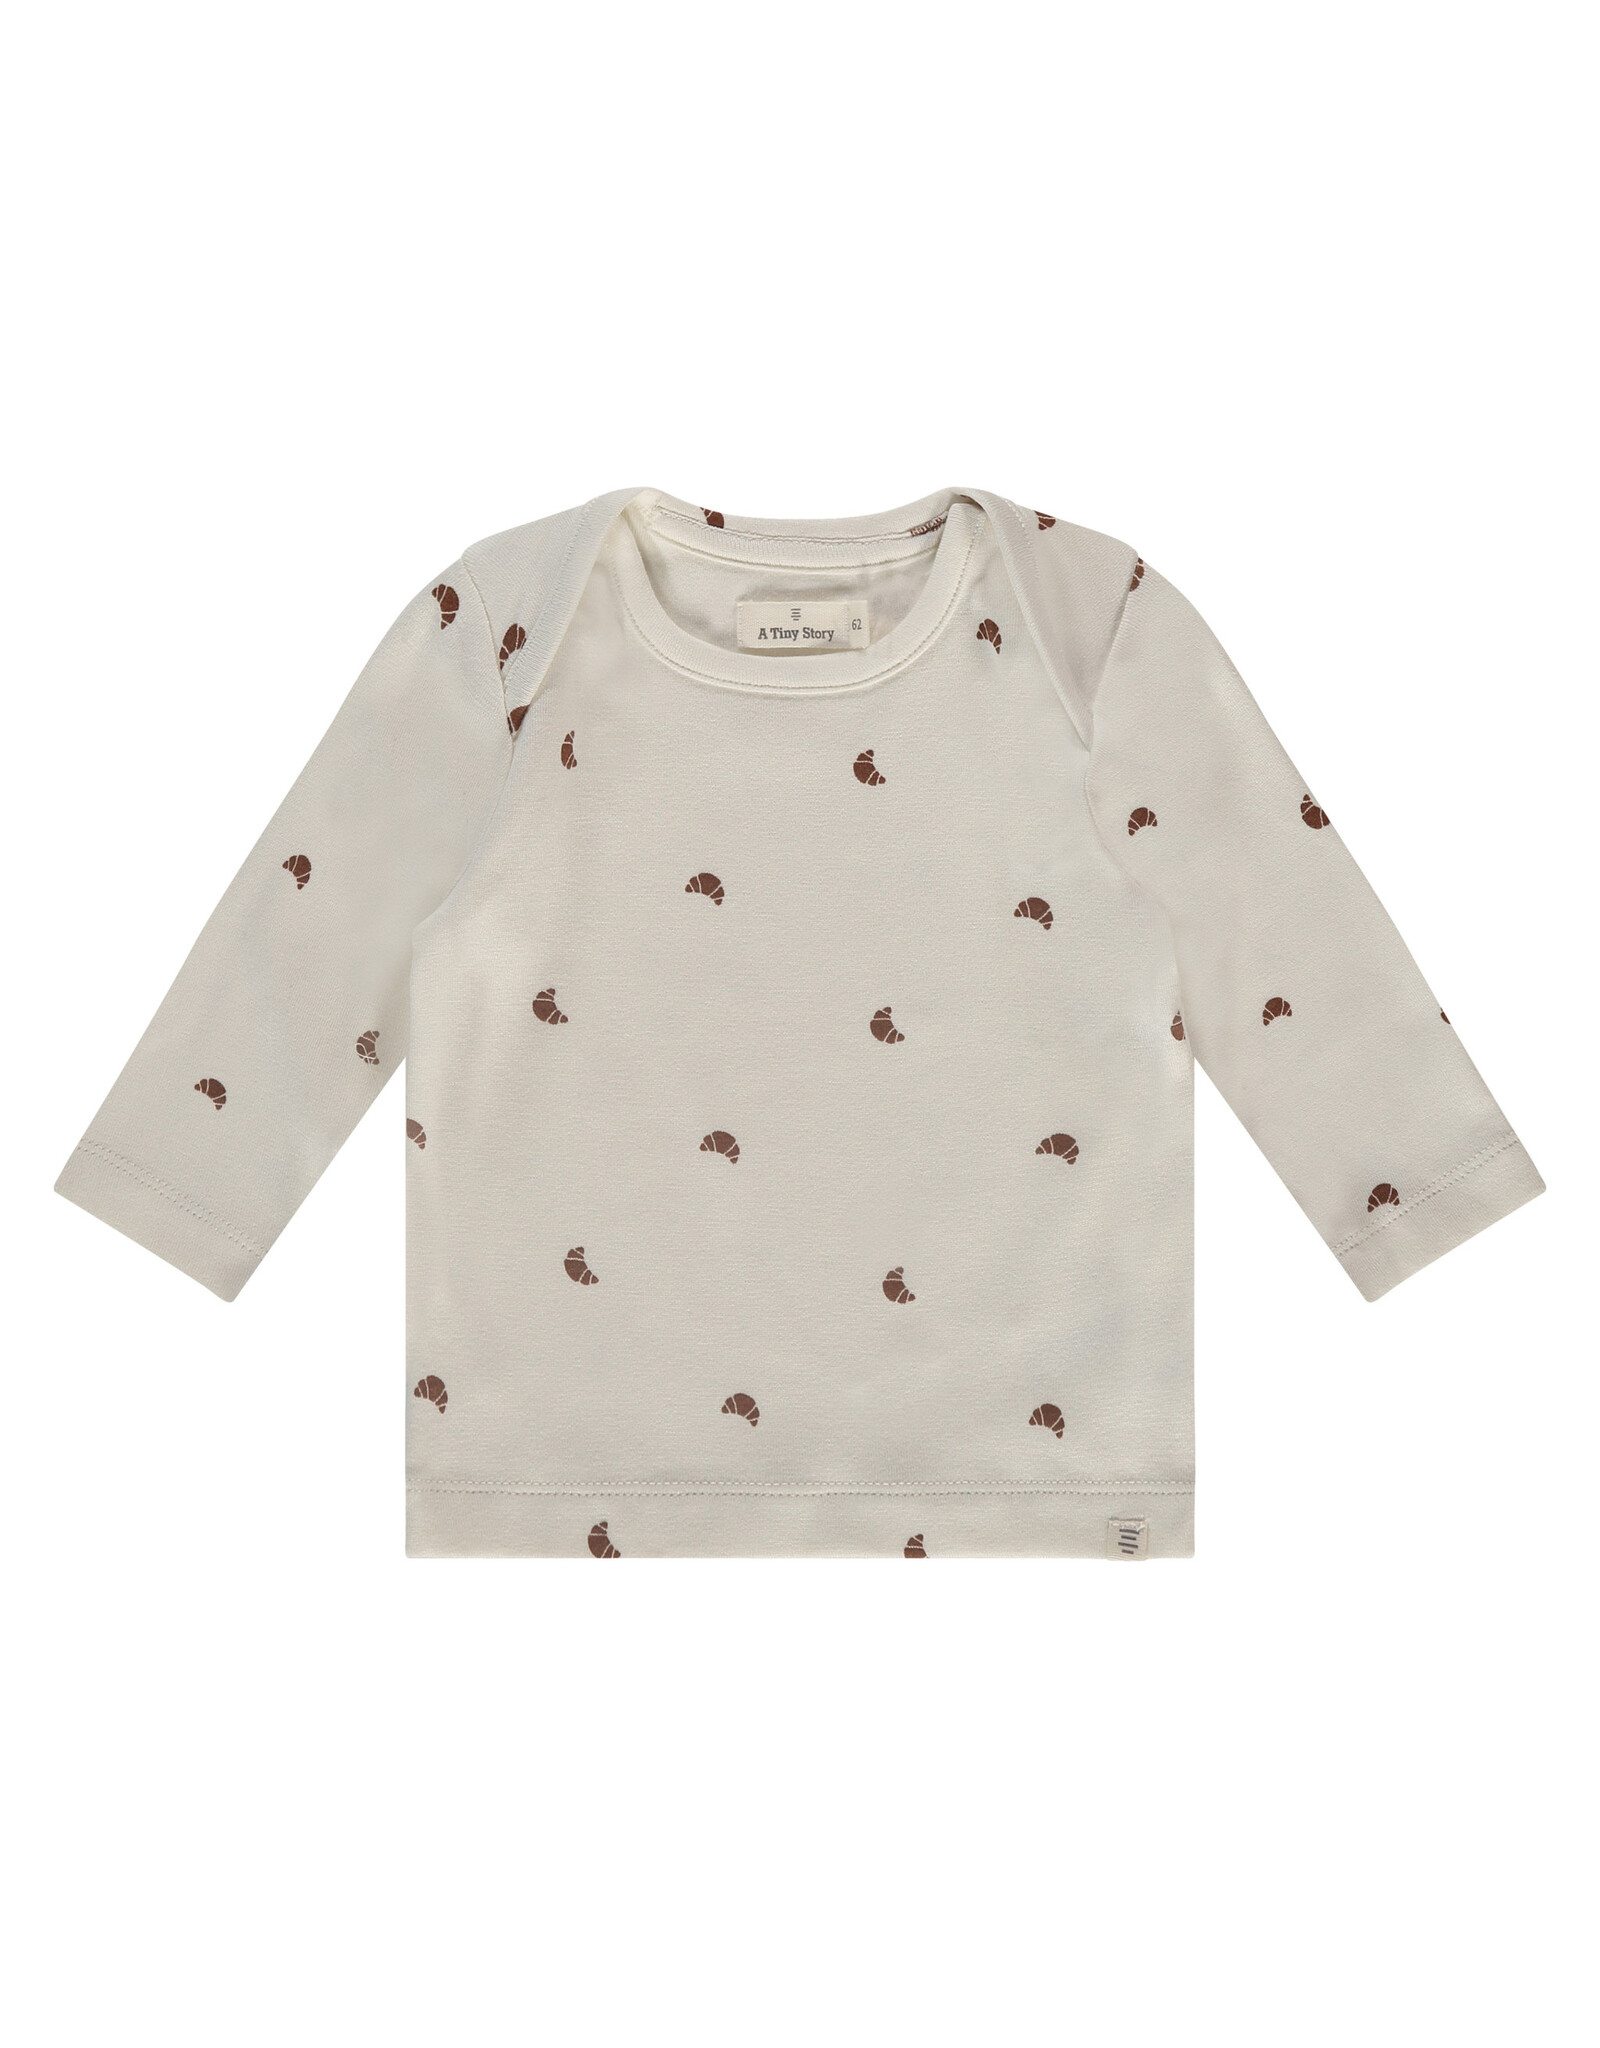 A Tiny Story Baby long sleeve - creme